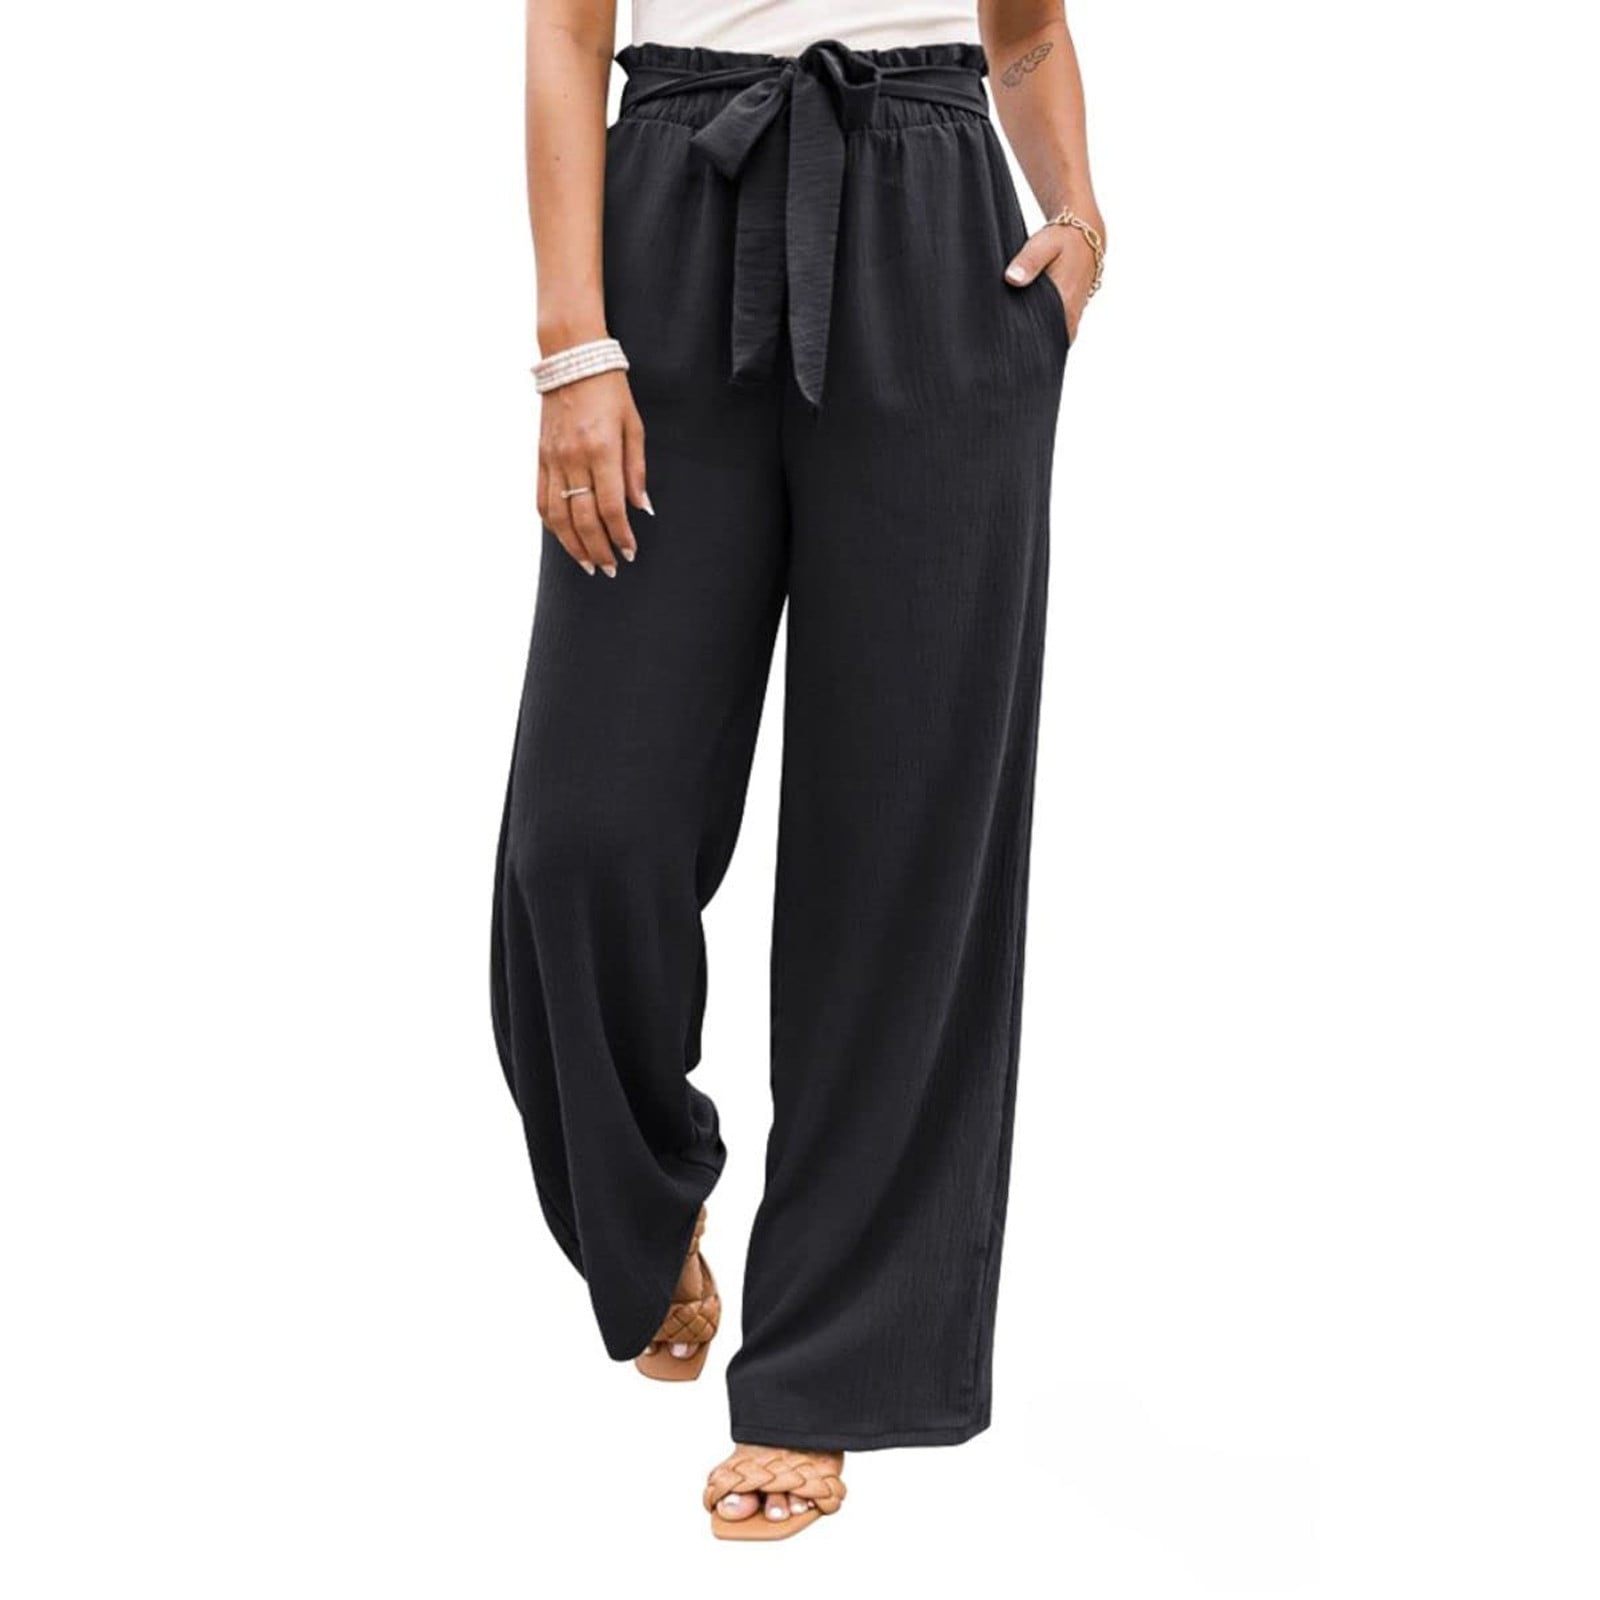 Wide Leg Palazzo pants for women Summer Solid Casual Loose Fit